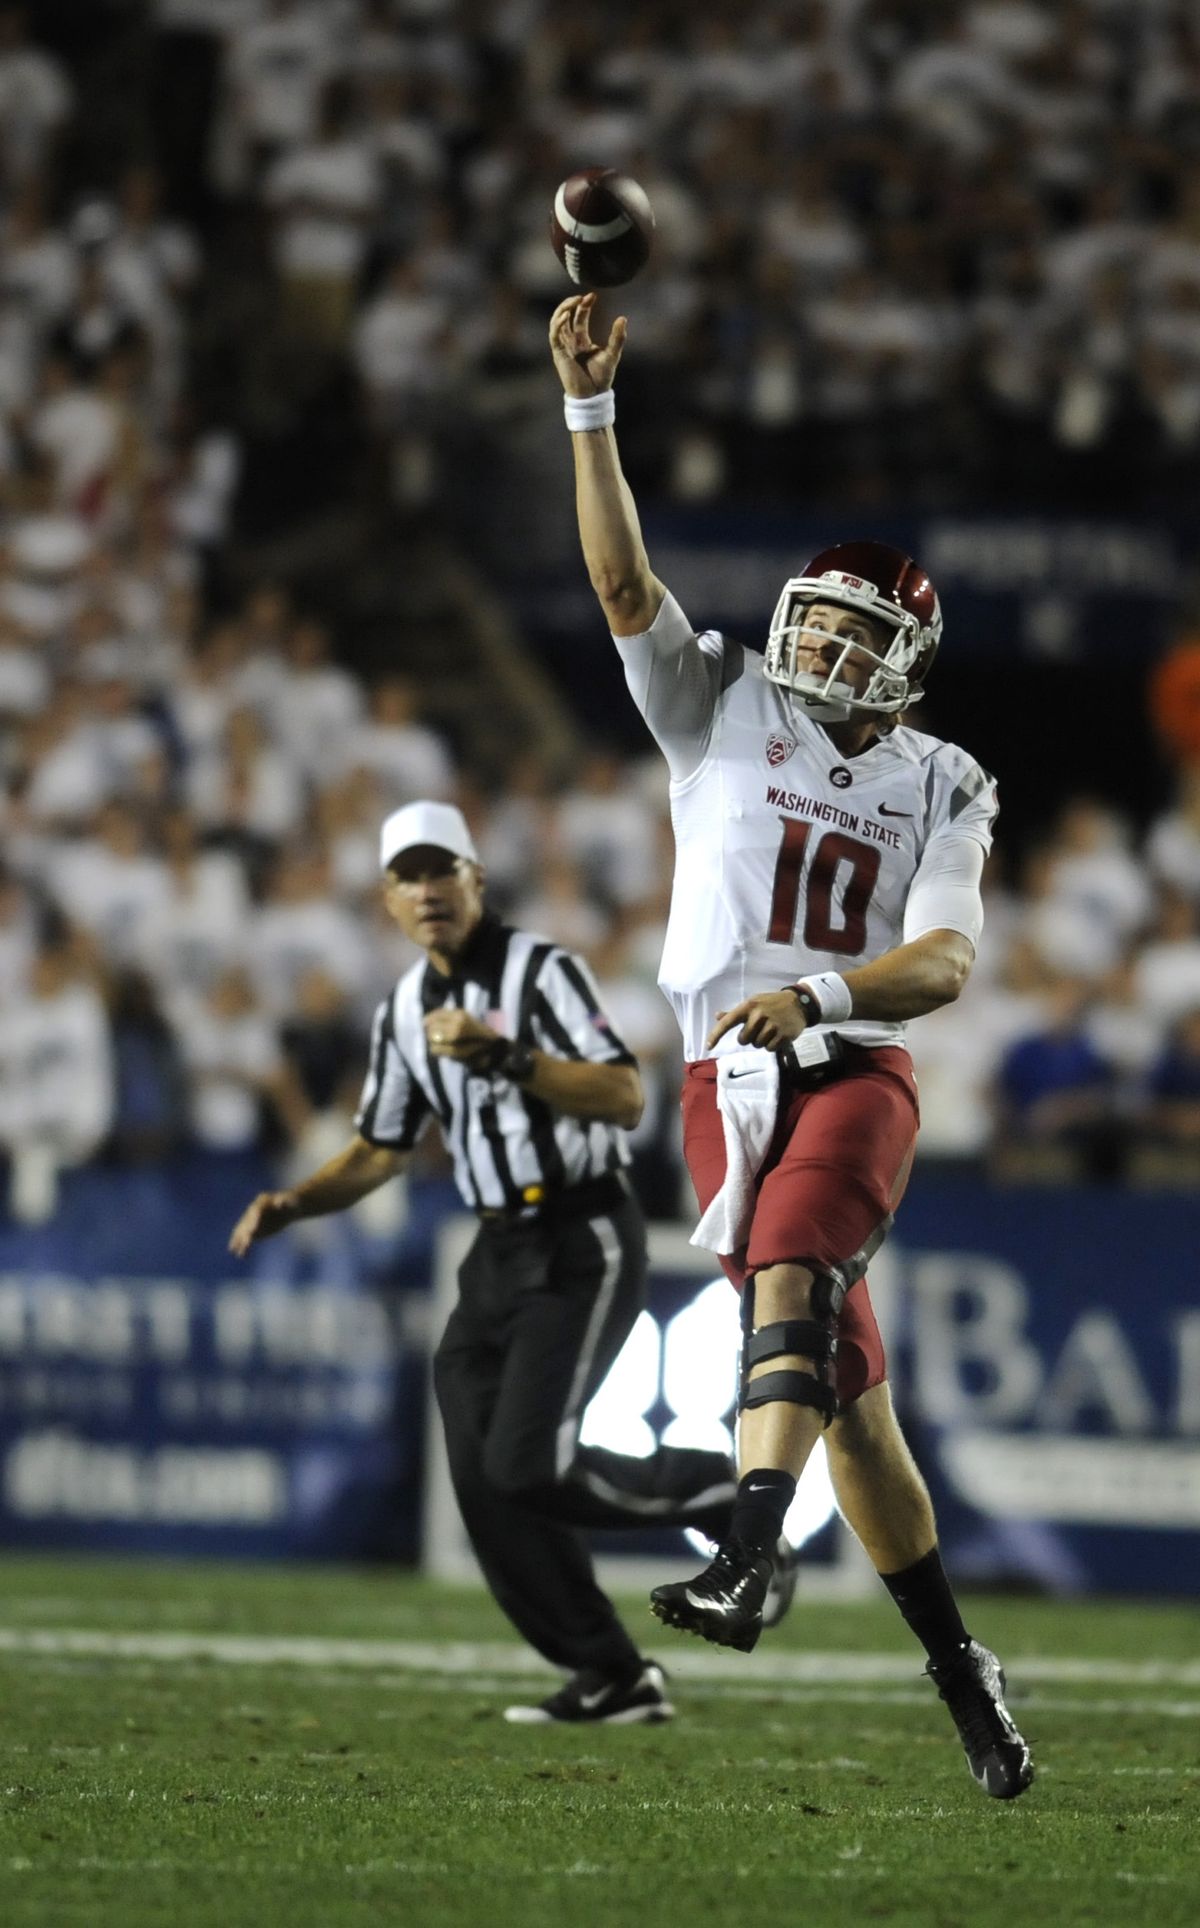 Washington State quarterback Jeff Tuel and the Cougars’ passing game had mixed results in the 30-6 loss. (Tyler Tjomsland)